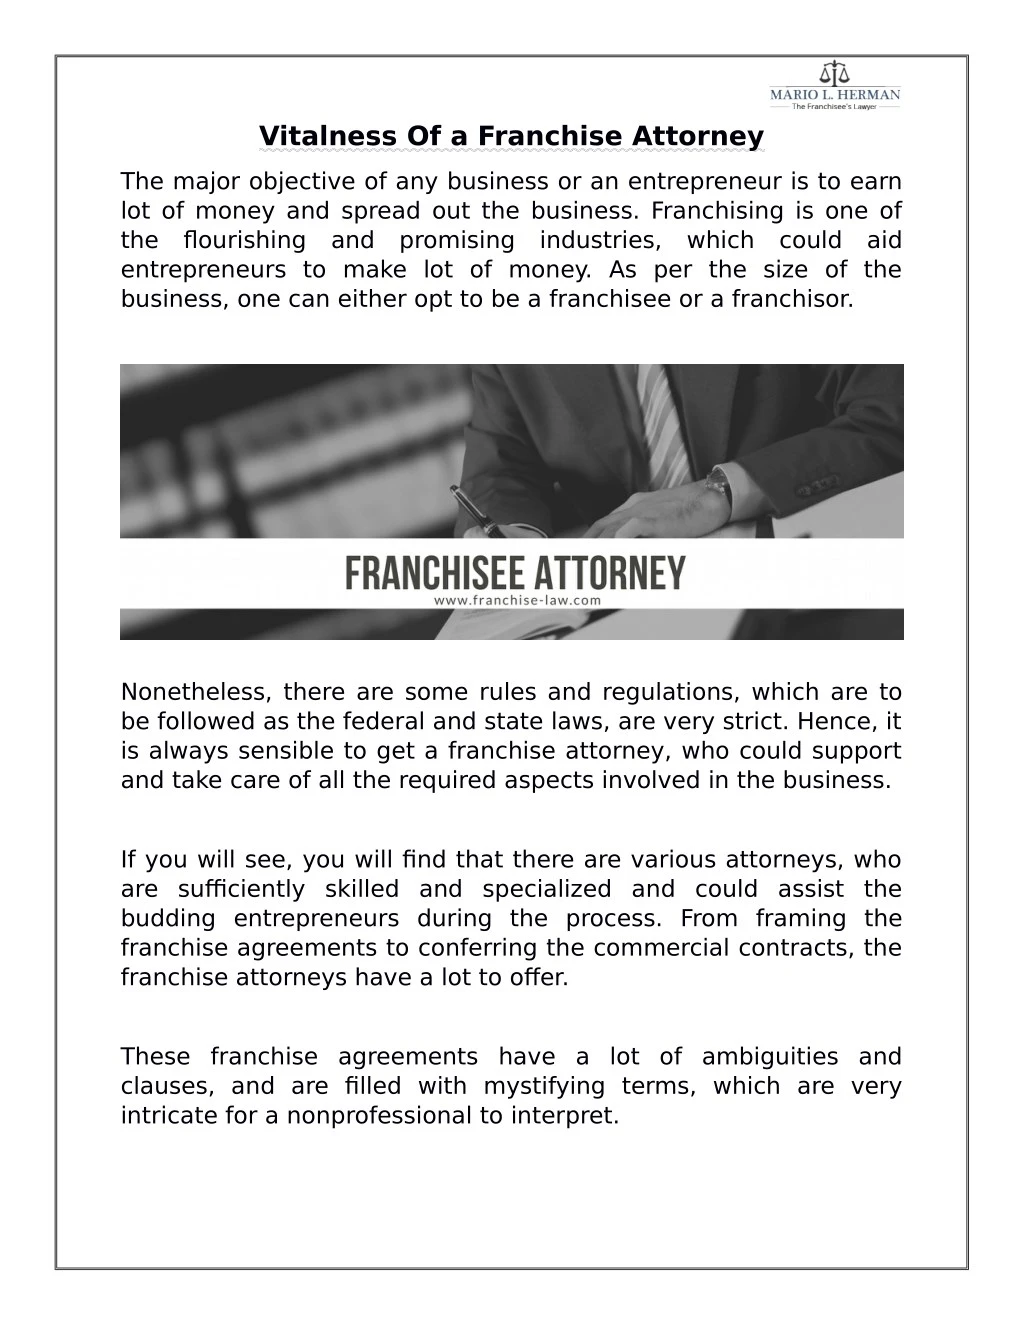 vitalness of a franchise attorney